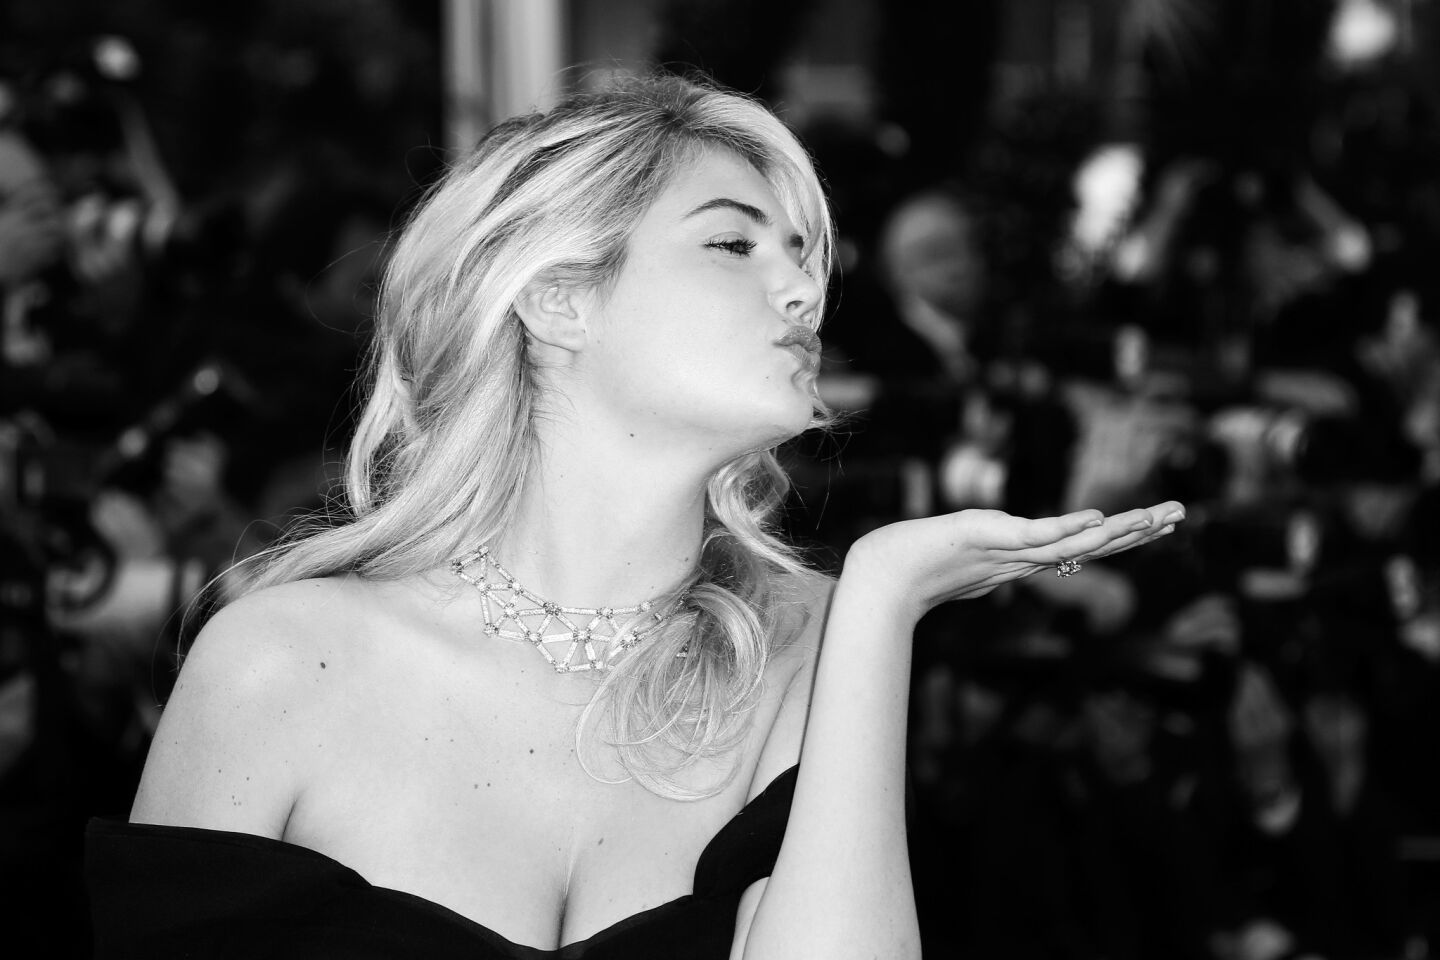 Kate Upton arrives for the screening of "On the Road" presented in competition at the 65th Cannes film festival.